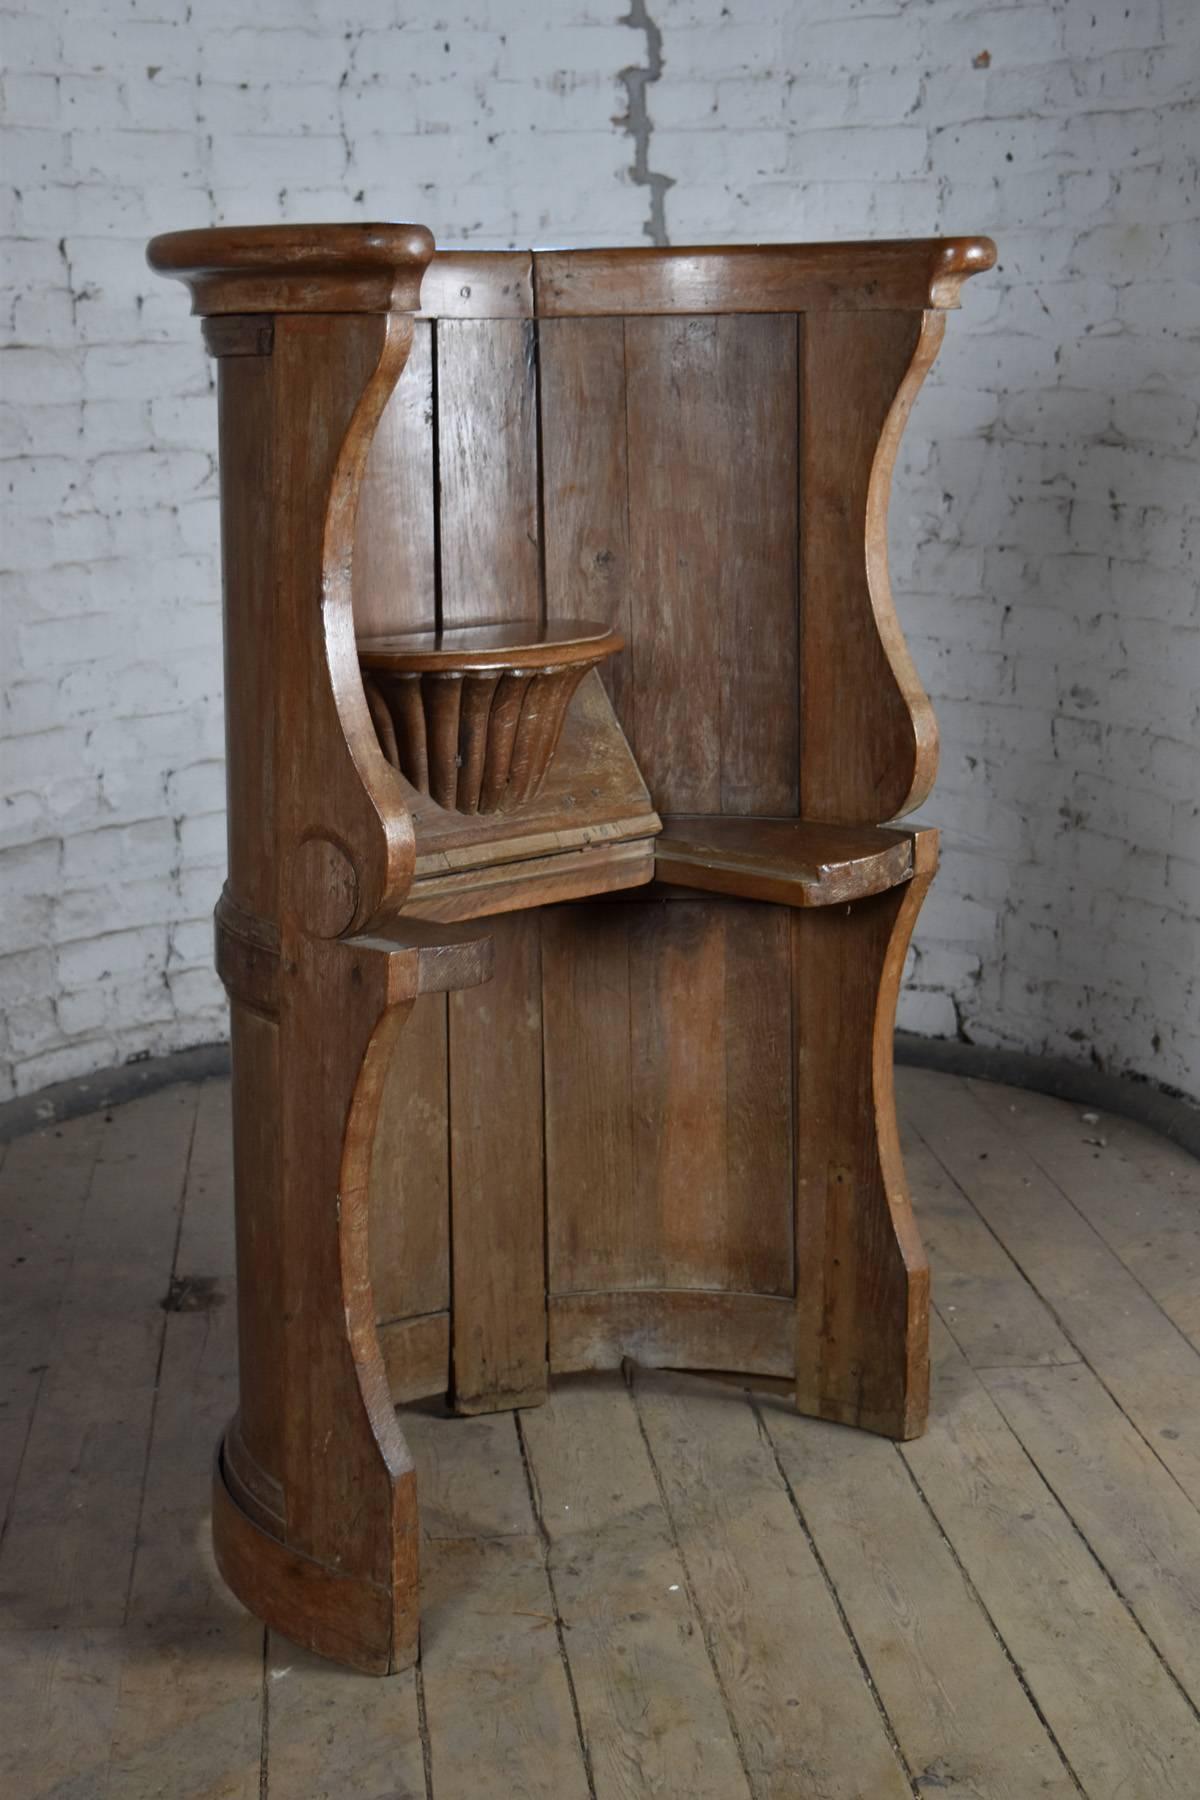 Tall, unusual and conceptual chair of half-round paneled form, The seat can be lifted on hinges forming a misericord supported by a fluted console.  A a rare and  form of free-standing choir stall, made of oak and having a beautiful unstained light